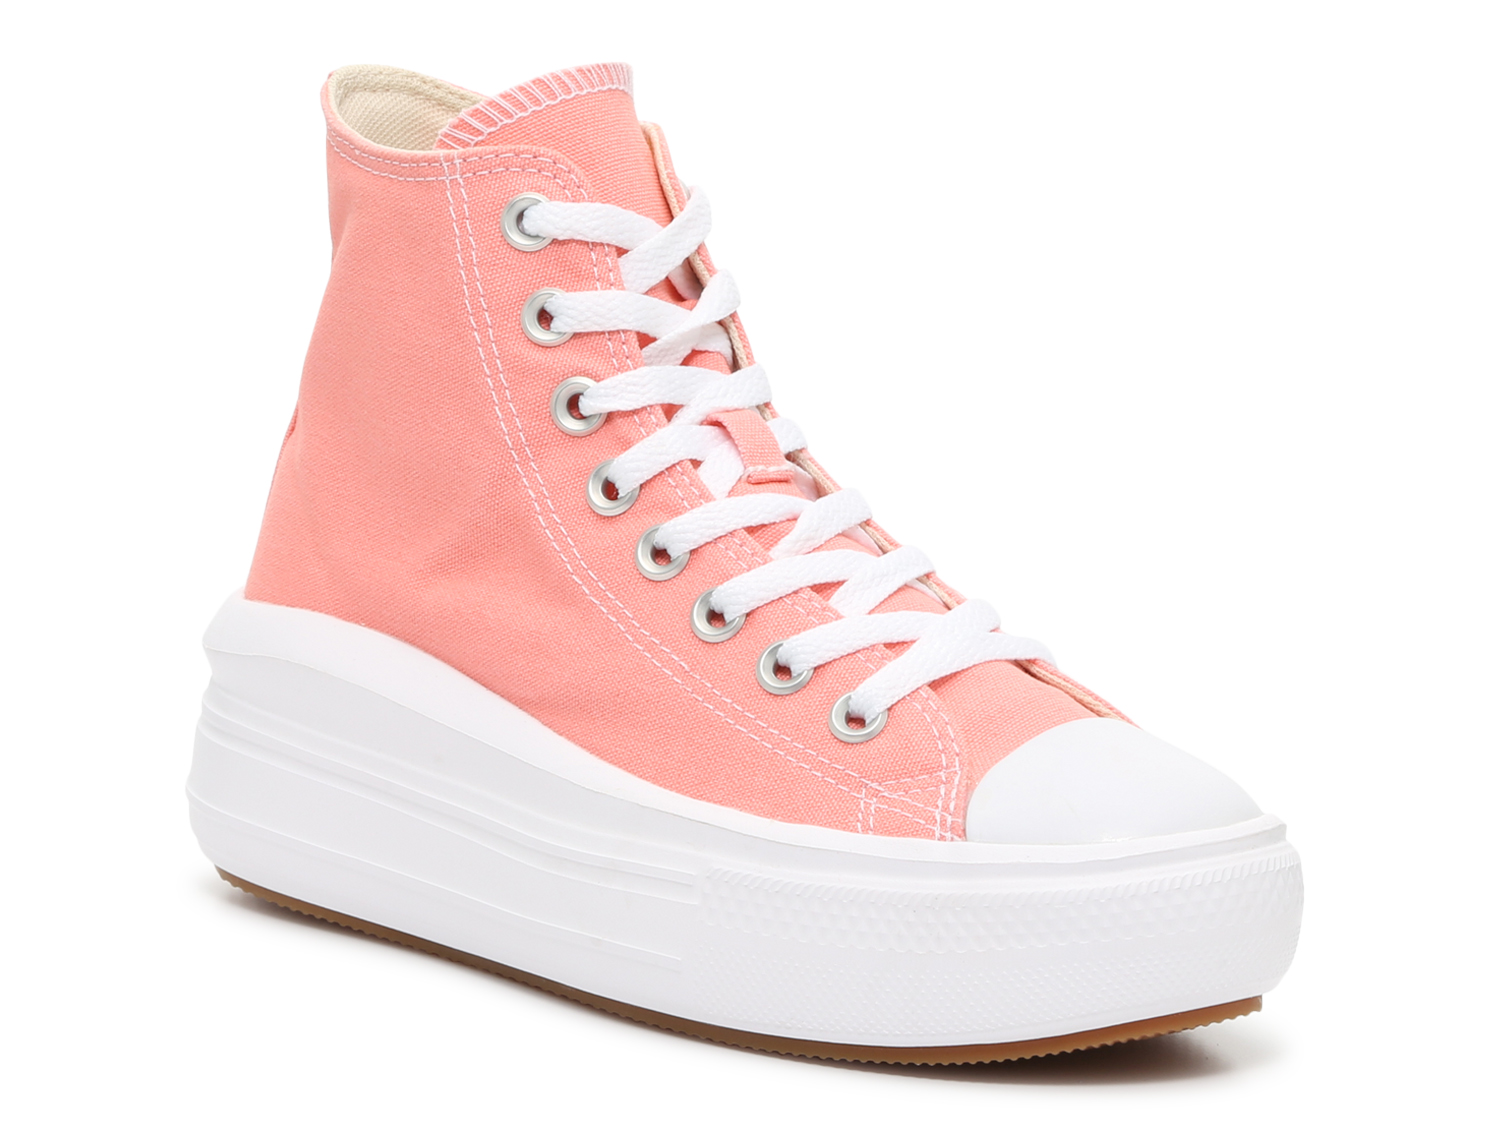 Taylor　Women's　All　Sneaker　Shipping　Chuck　Move　High-Top　Free　DSW　Converse　Star